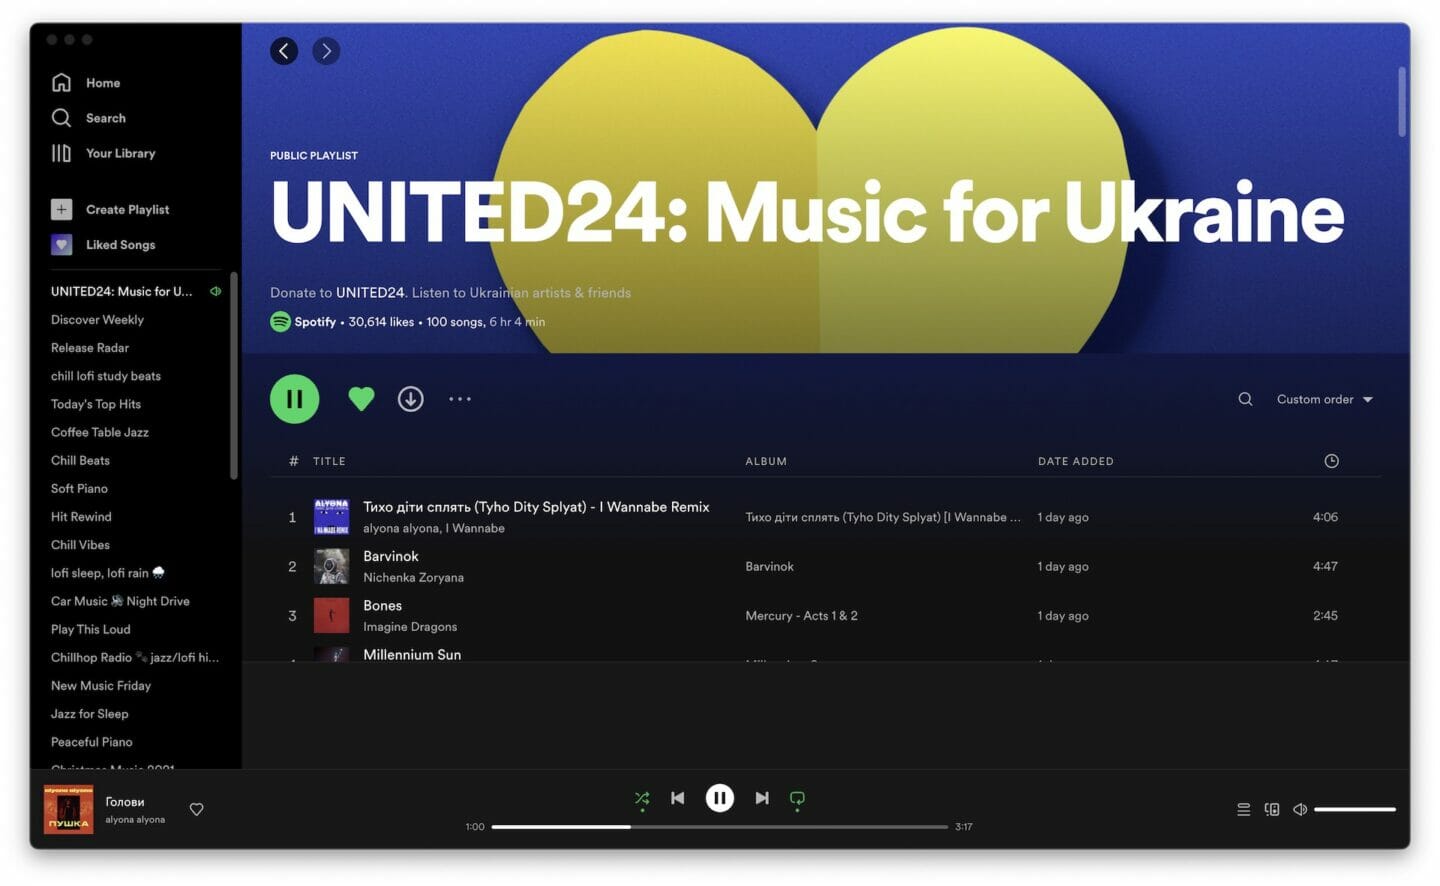 UNITED24 has prepared a Spotify tracklist for the Independence Day of Ukraine. It also has a charitable purpose